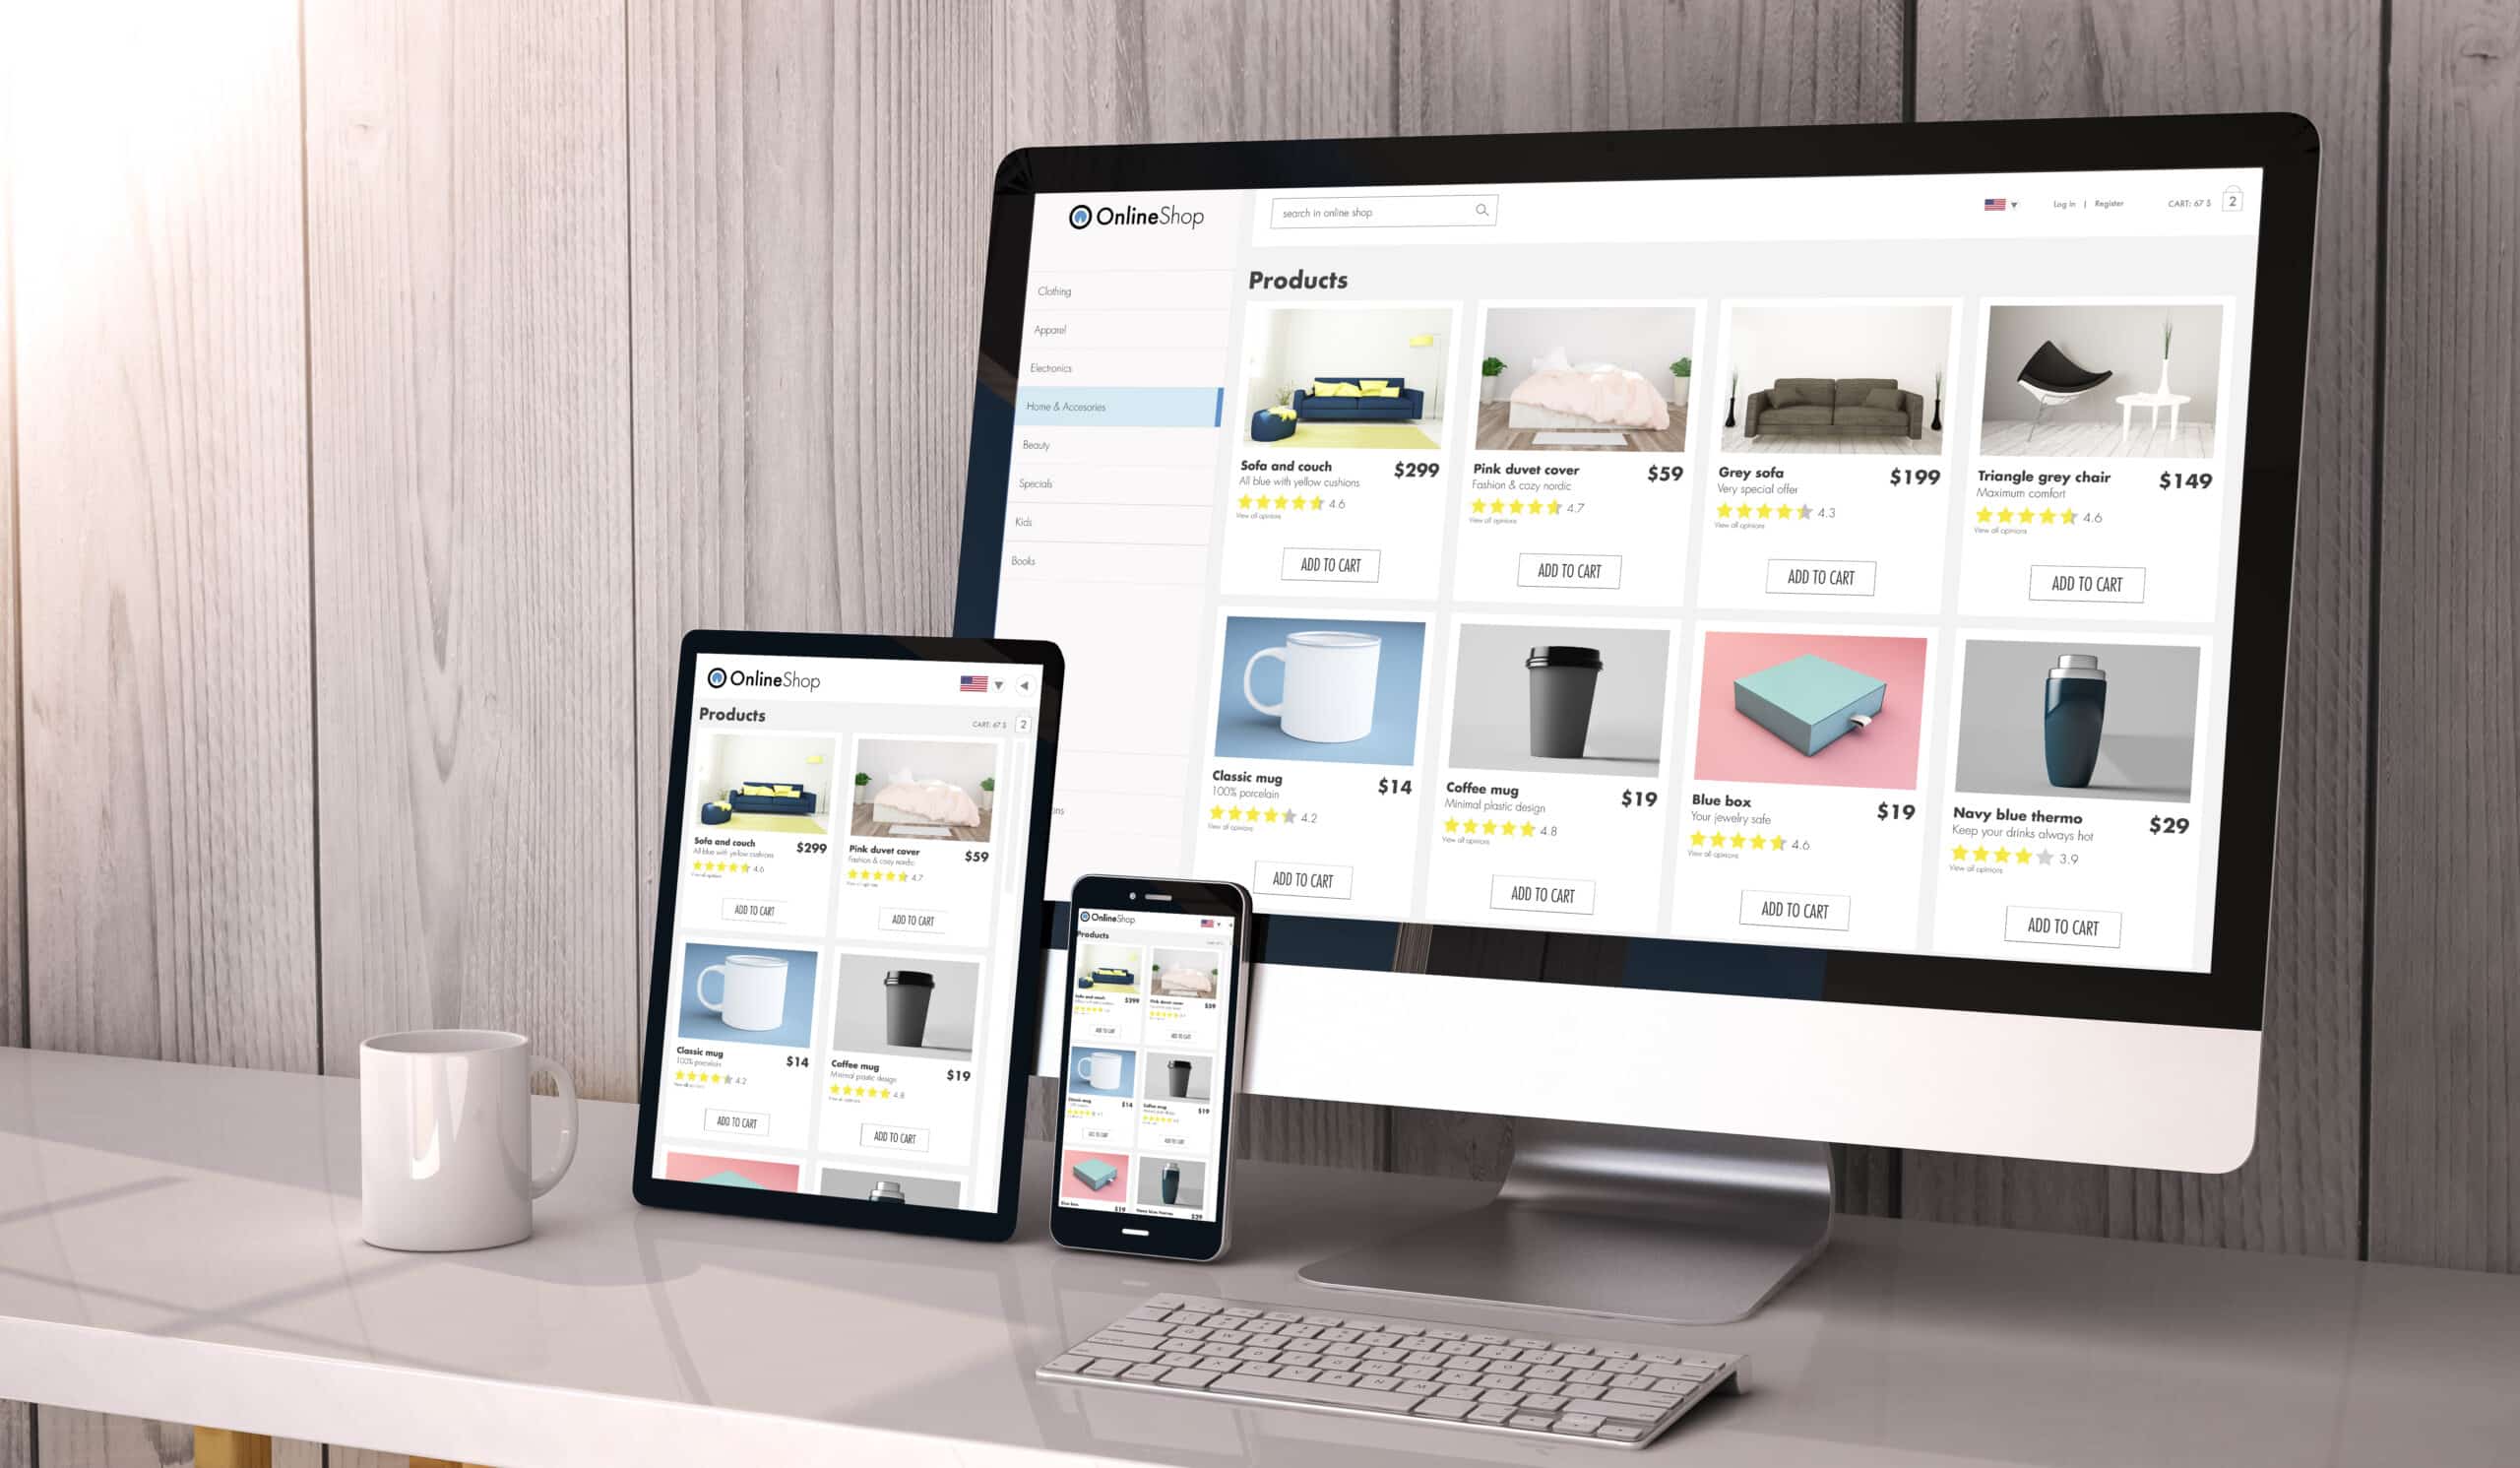 eCommerce site design layout on a desktop, tablet, and smartphone